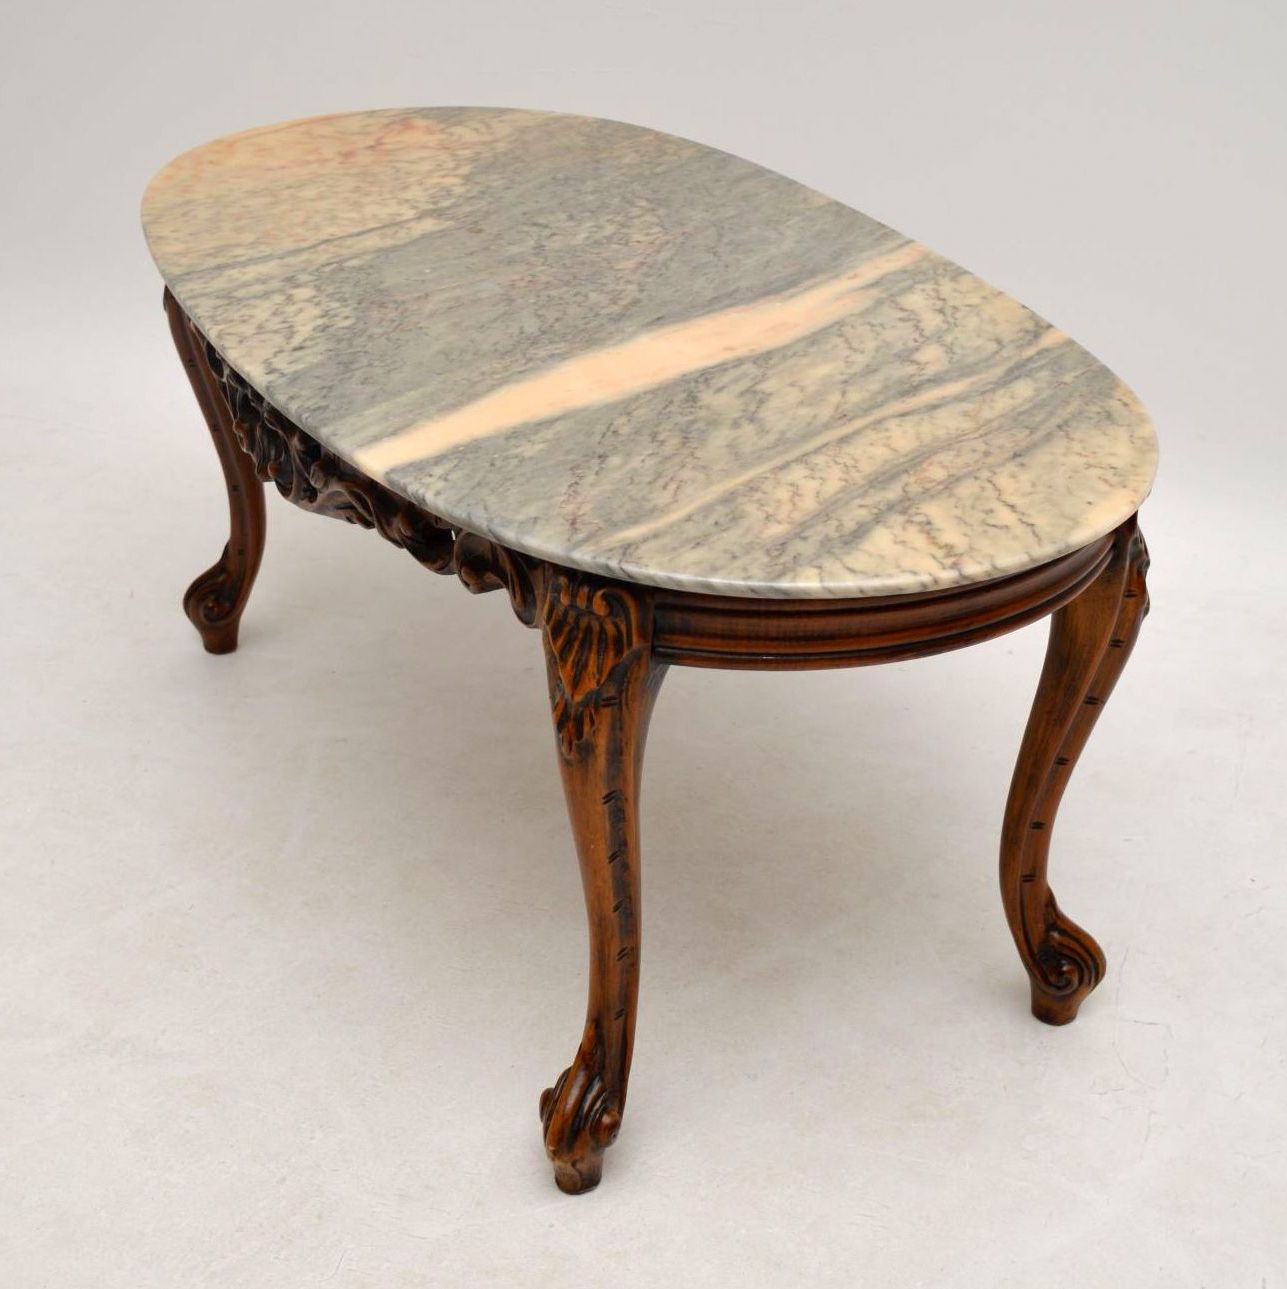 Popular Marble Top Coffee Tables For Antique French Style Marble Top Coffee Table – Marylebone (View 2 of 20)